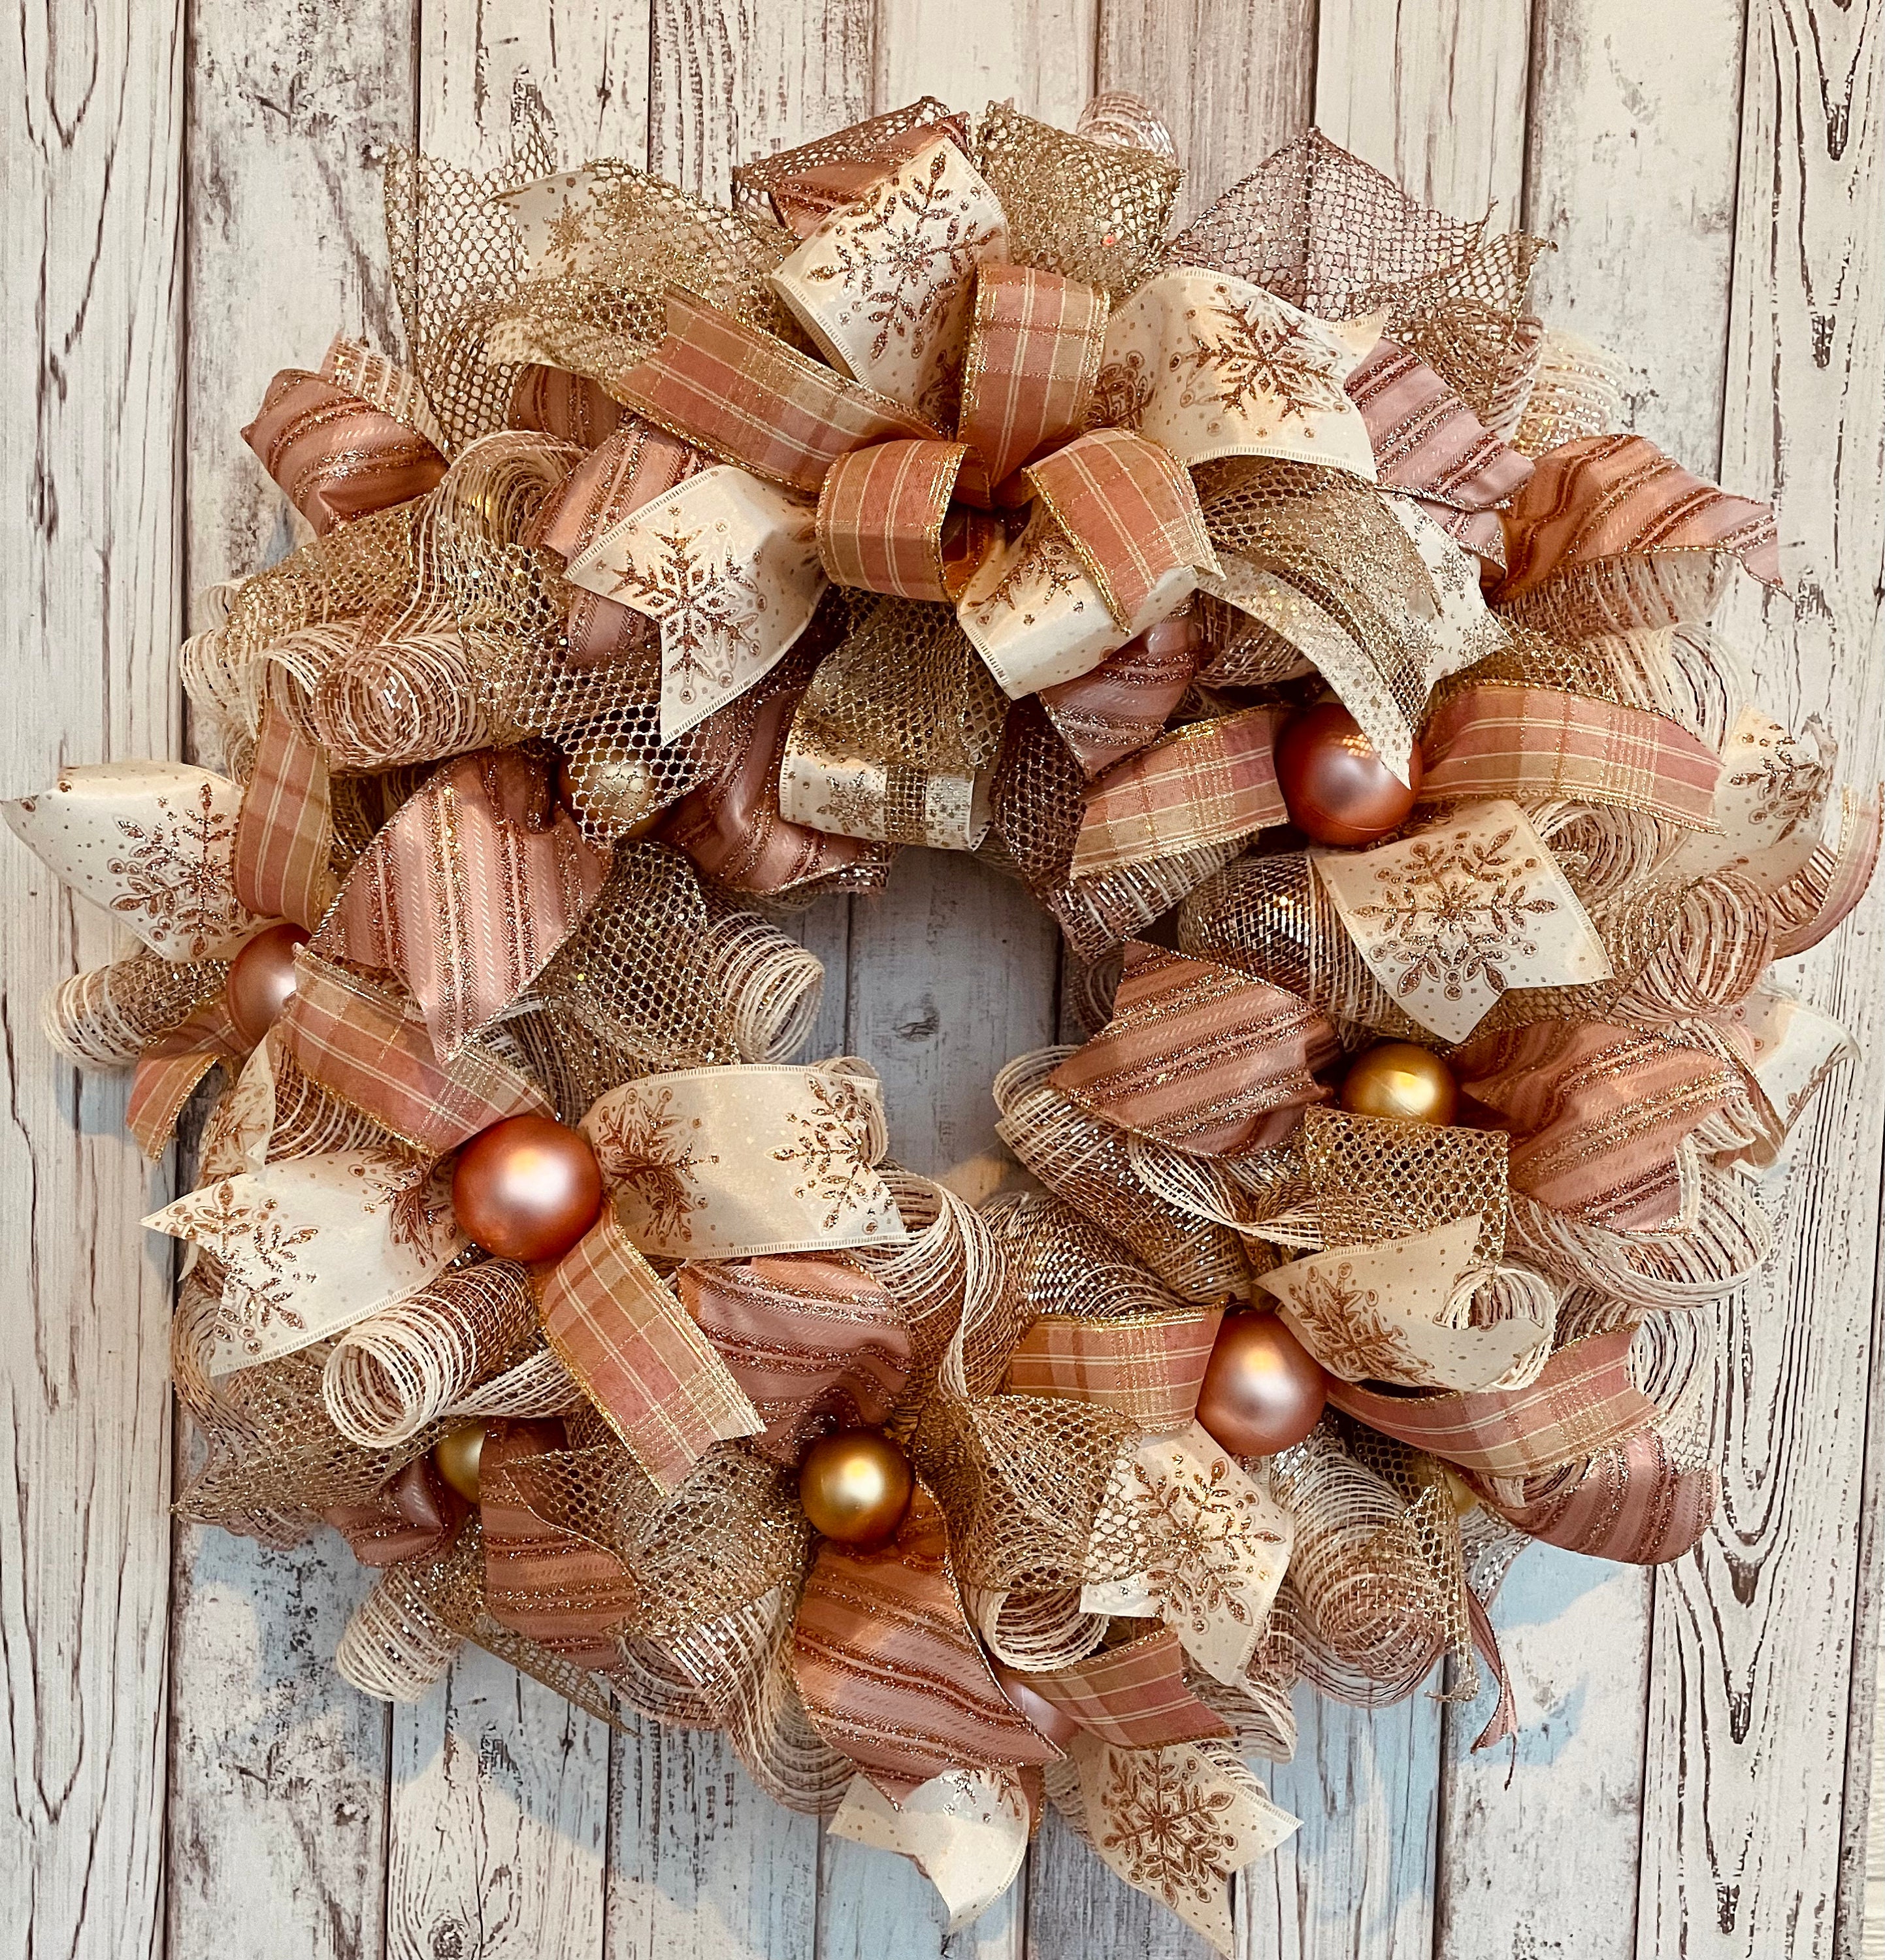 Deco Mesh Christmas Wreath - Upright and Caffeinated